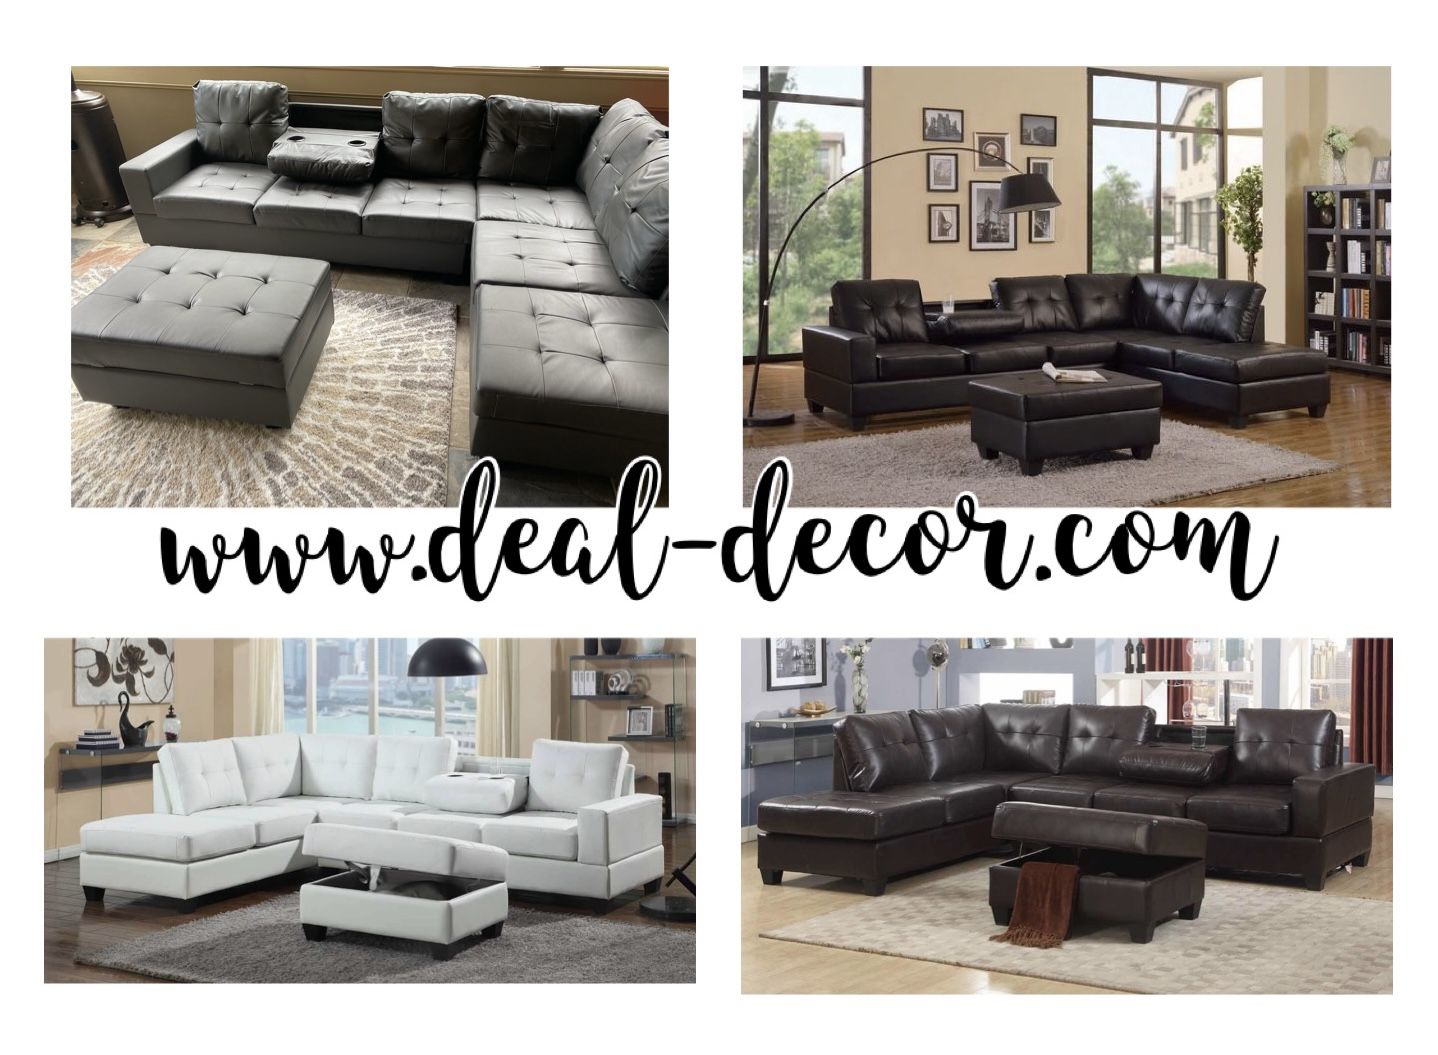 New Dark Gray, Black, White, Chocolate Brown Sectional With Storage, Ottoman, And Drop-Down Cupholder